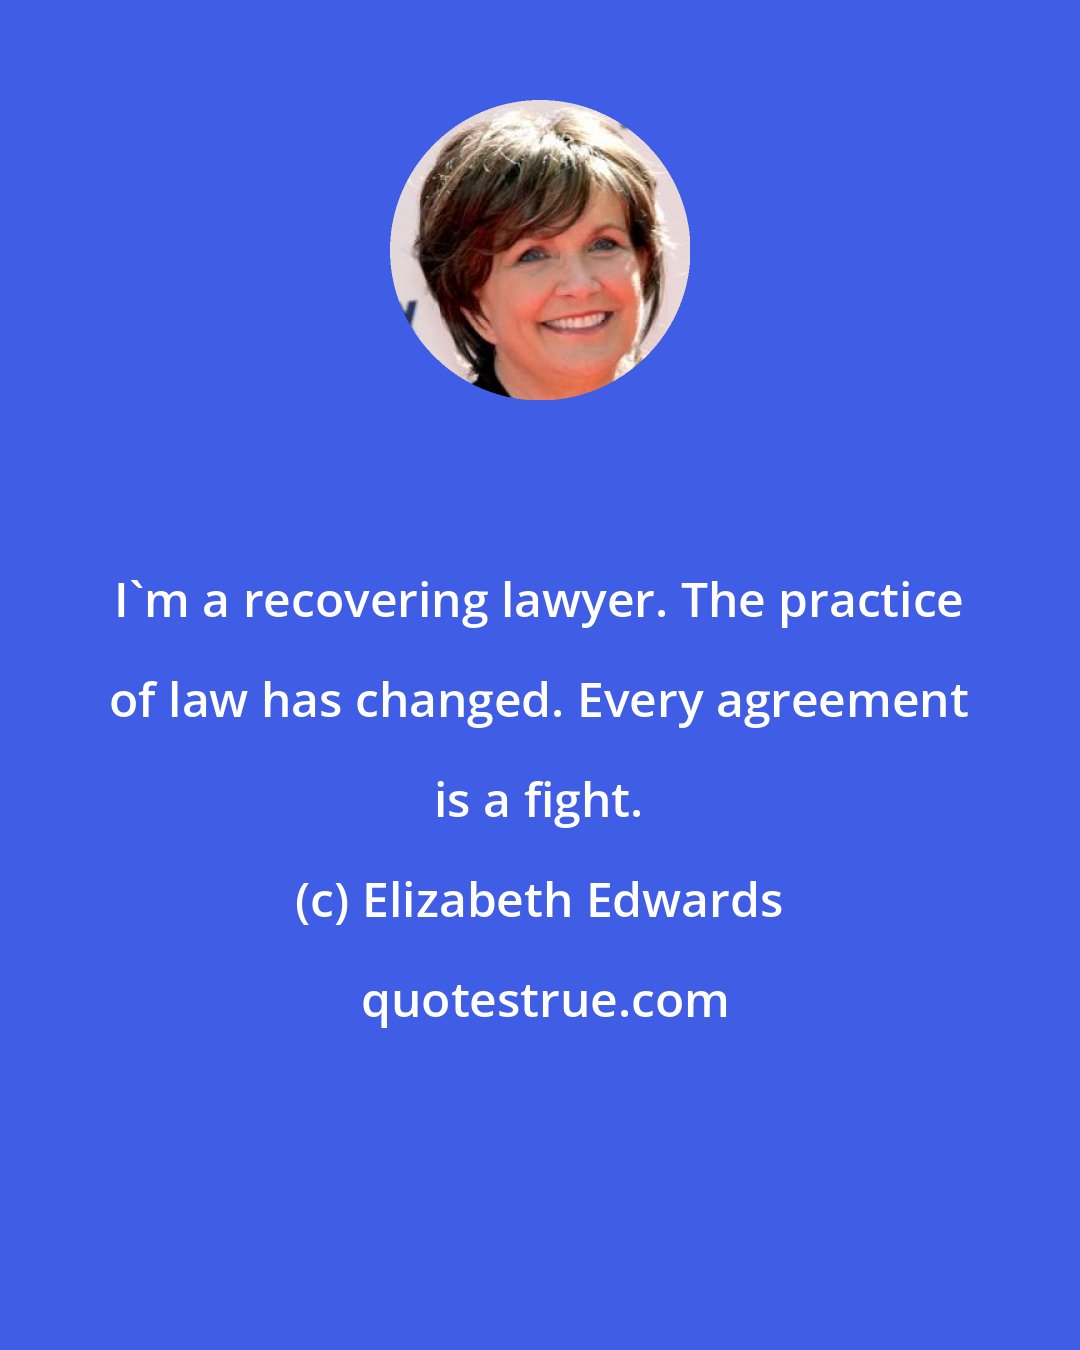 Elizabeth Edwards: I'm a recovering lawyer. The practice of law has changed. Every agreement is a fight.